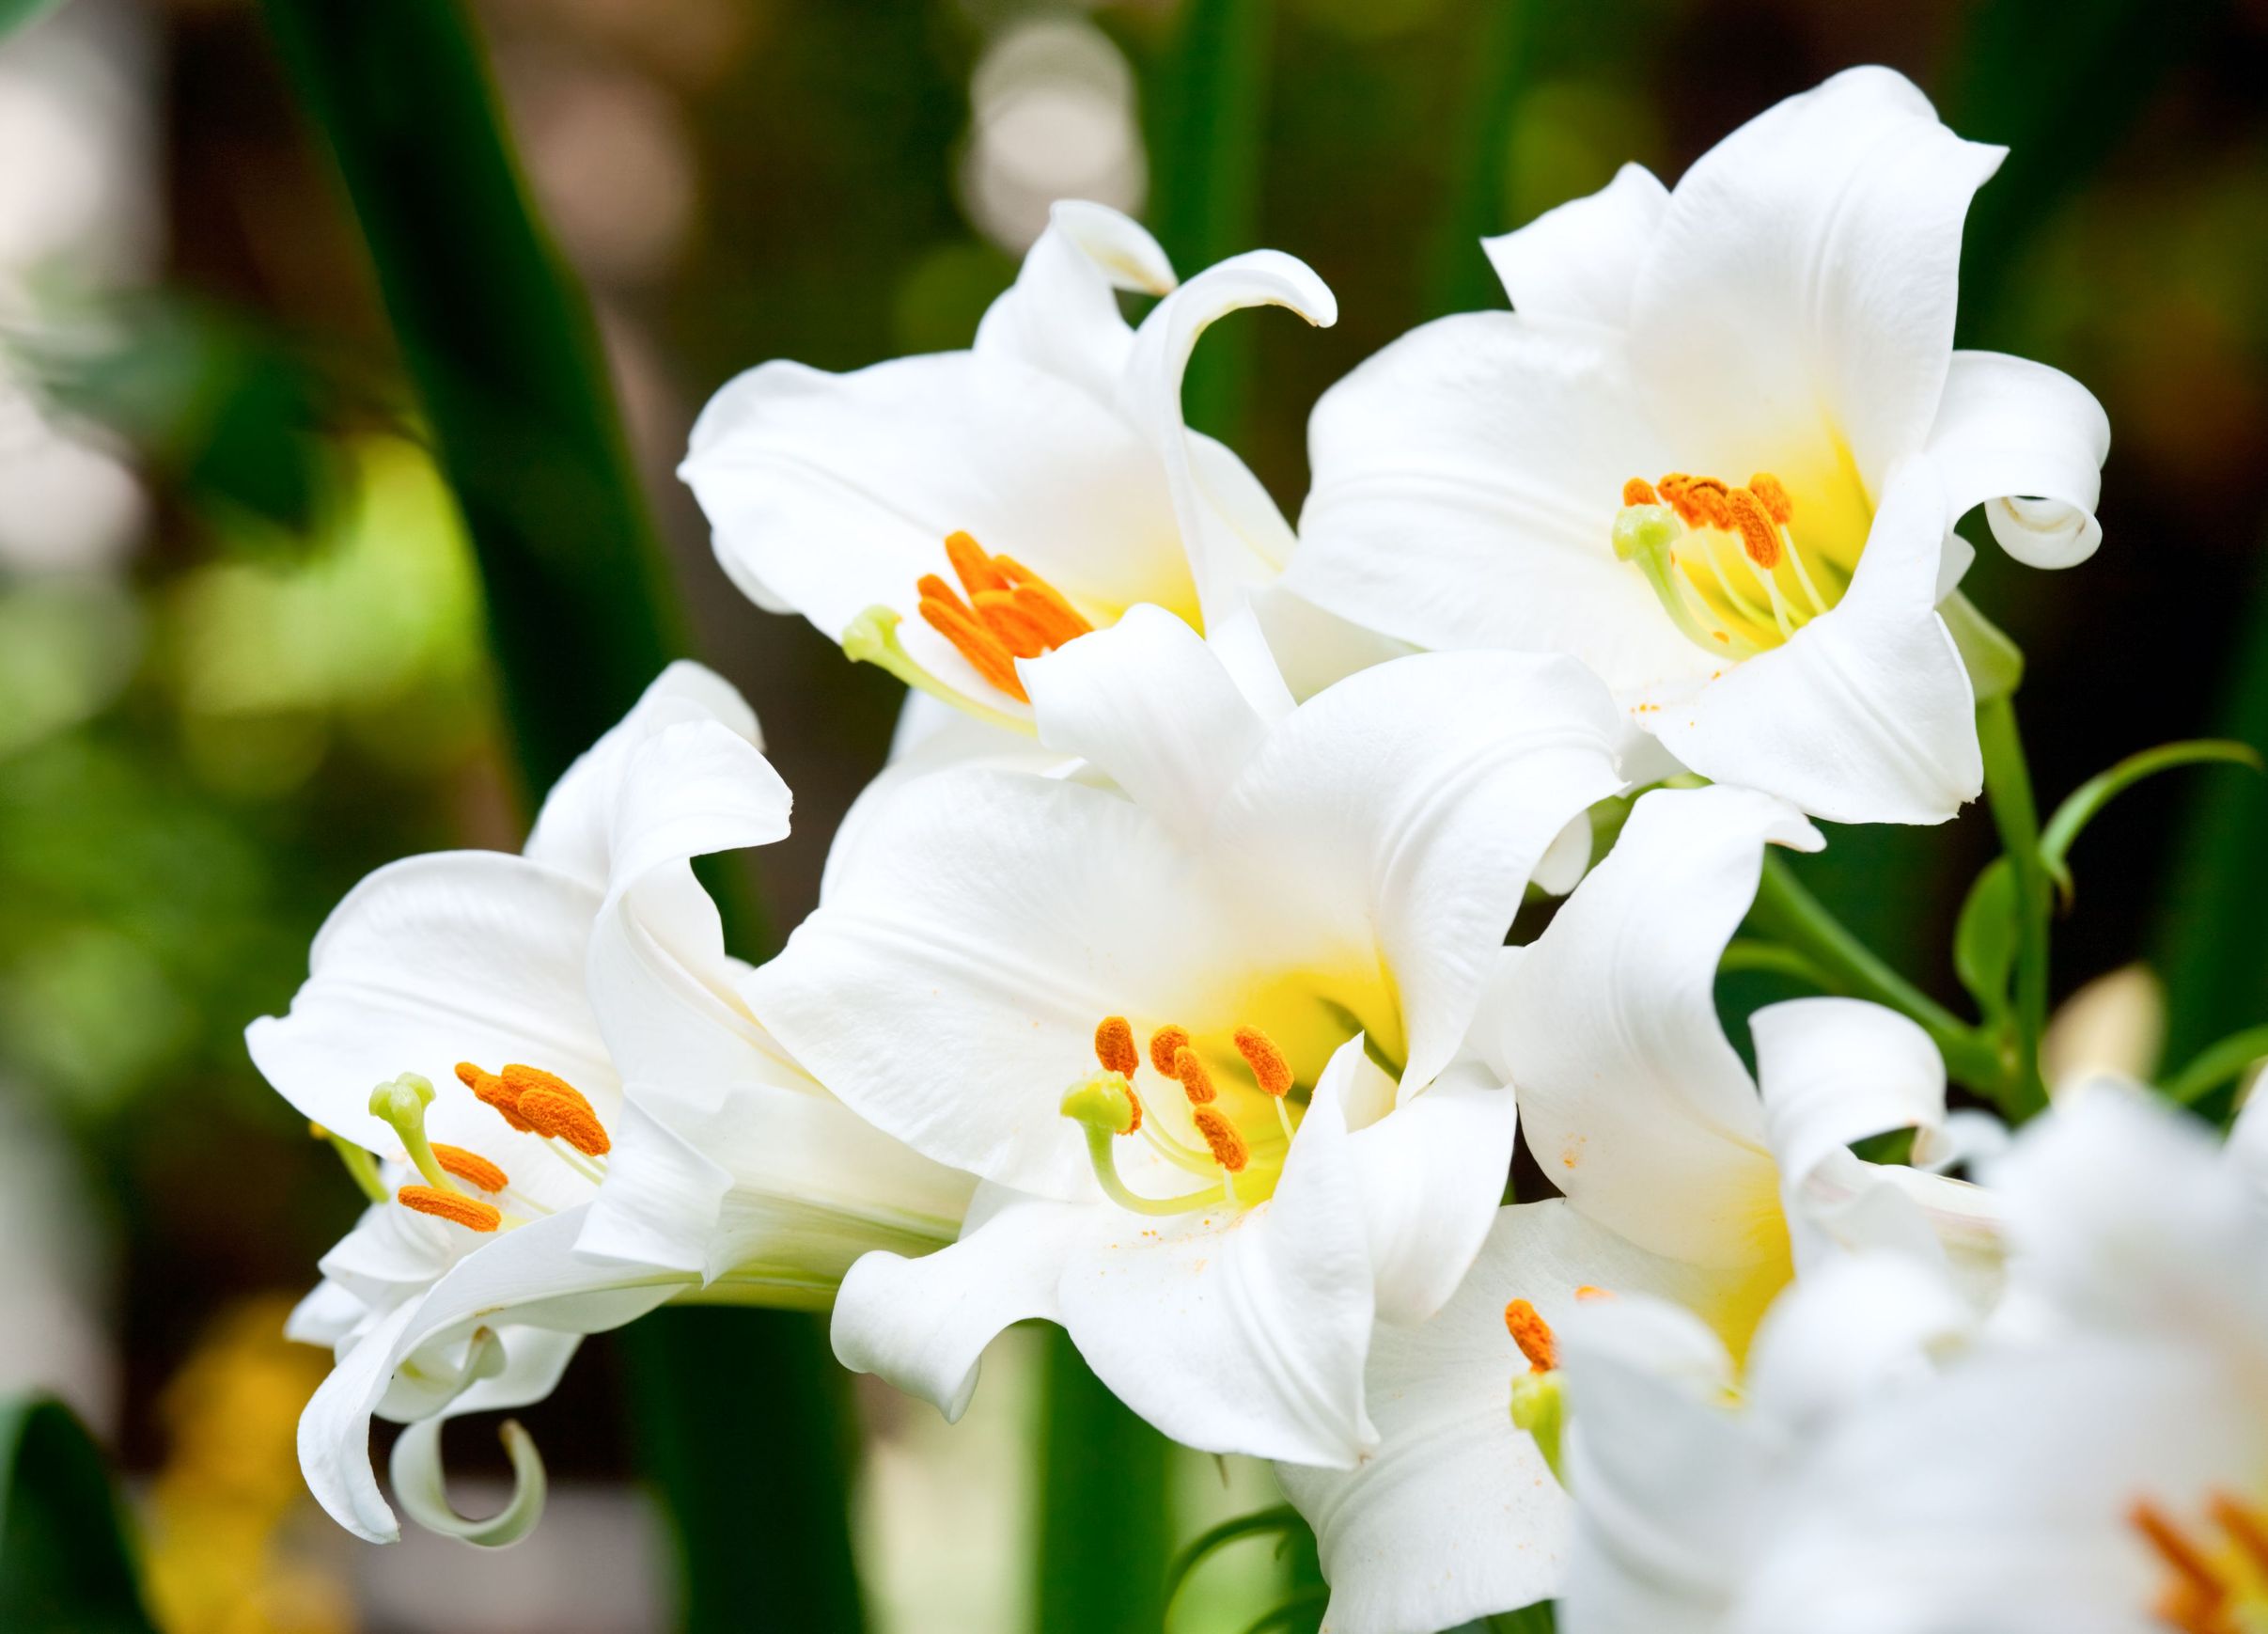 5235635 - white easter lily flowers in a garden, shallow dof